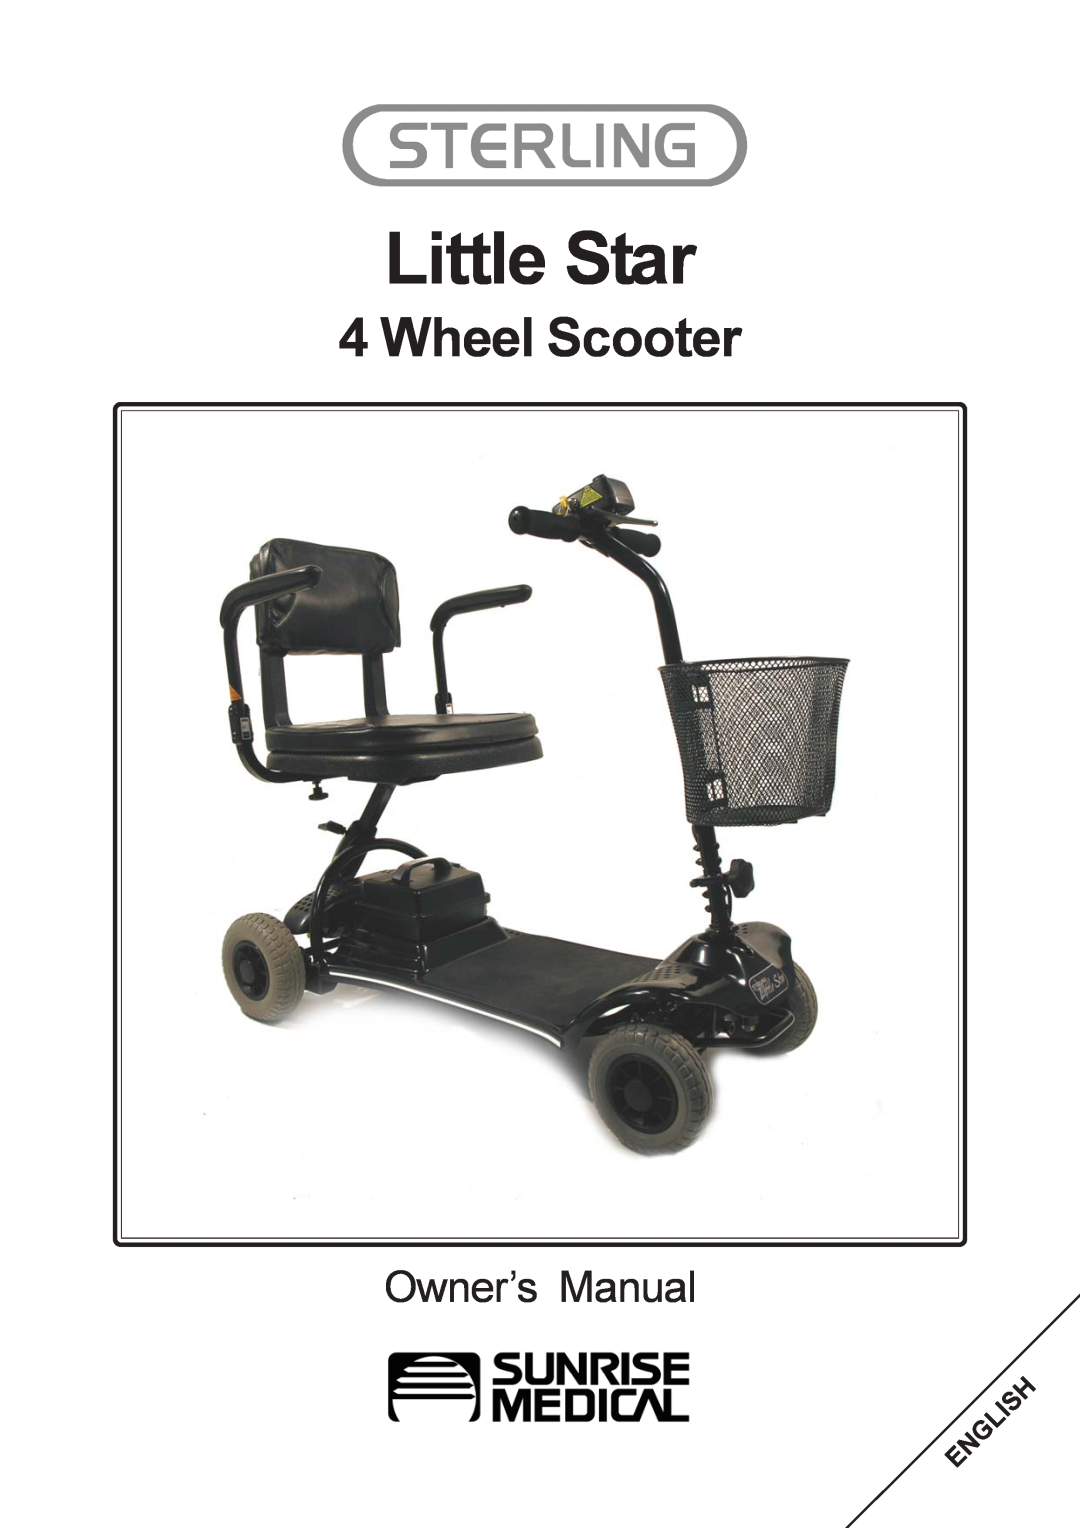 Sunrise Medical Mobility Scooter owner manual Little Star, Wheel Scooter, Owner’s Manual 